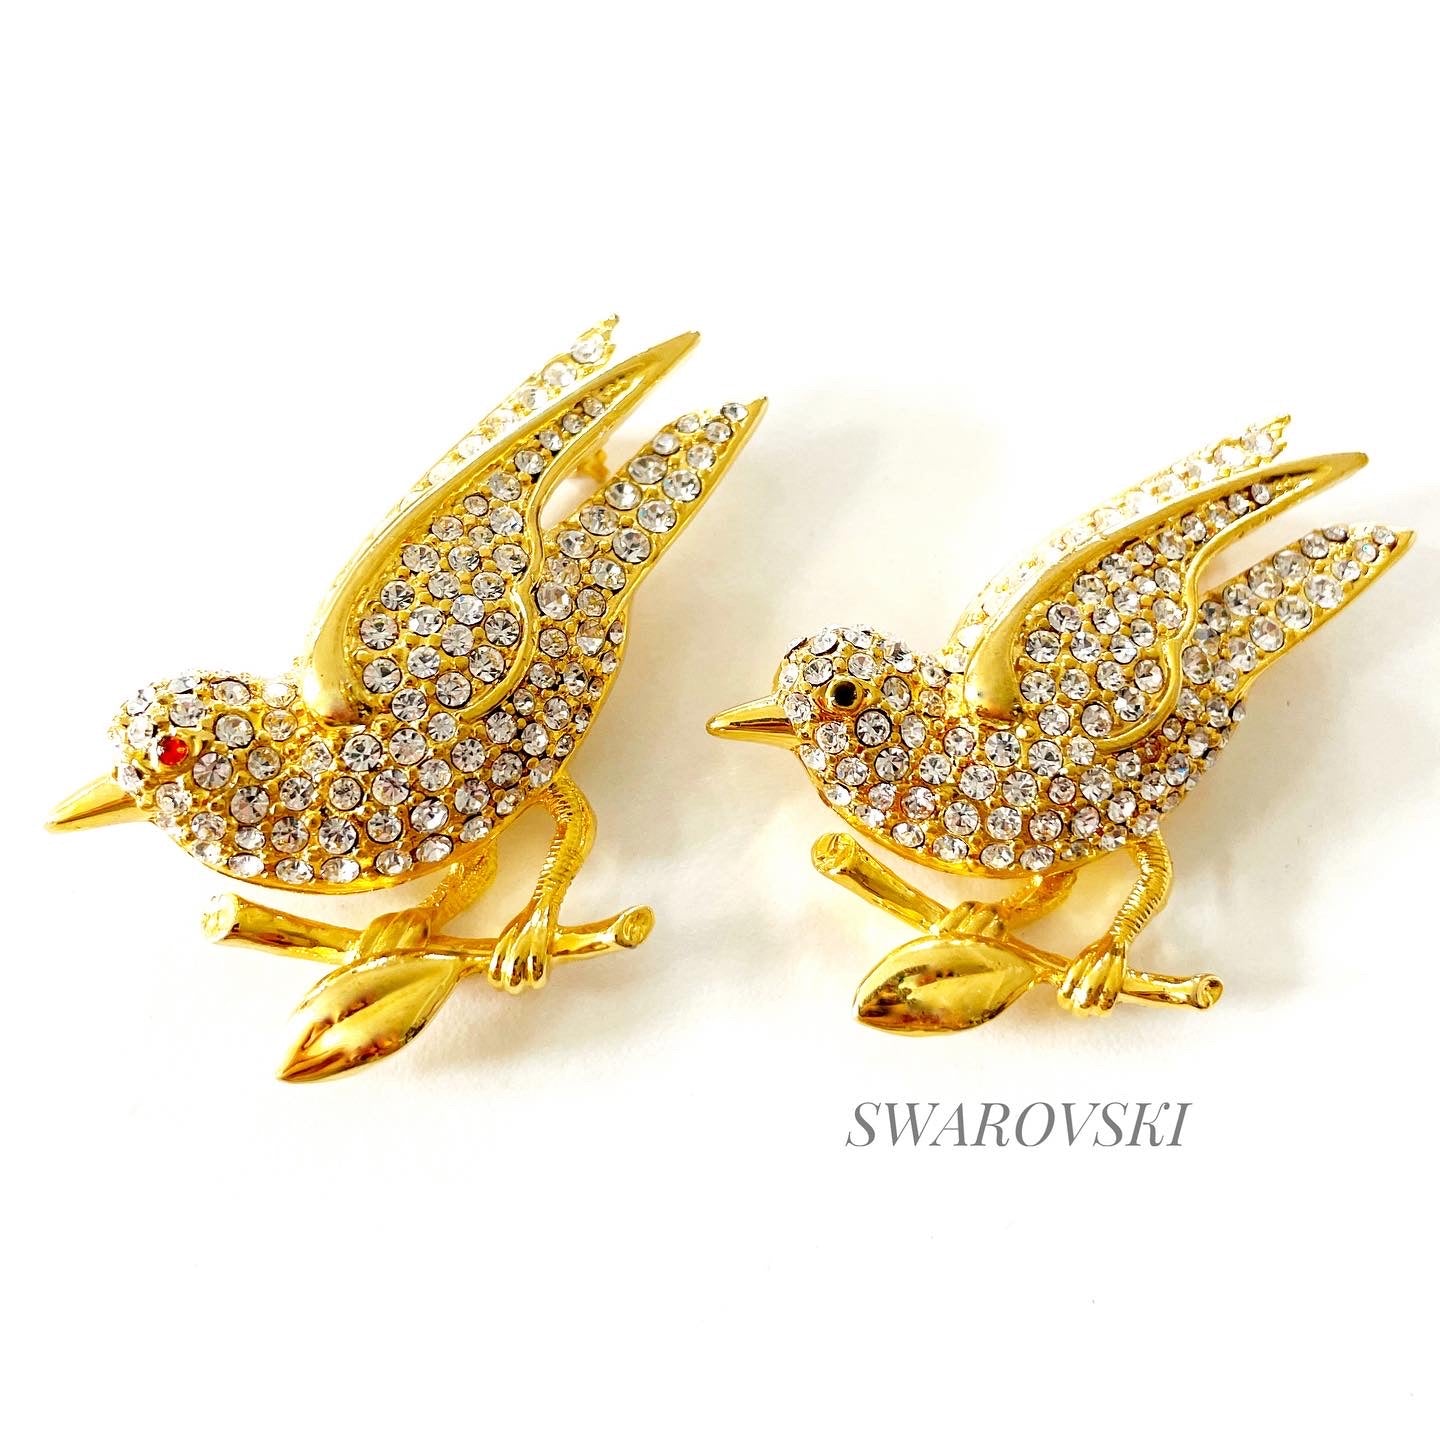 Vintage Swarovski signed swan logo pave crystal bird brooch accented with rudy/sapphire cabochon eye